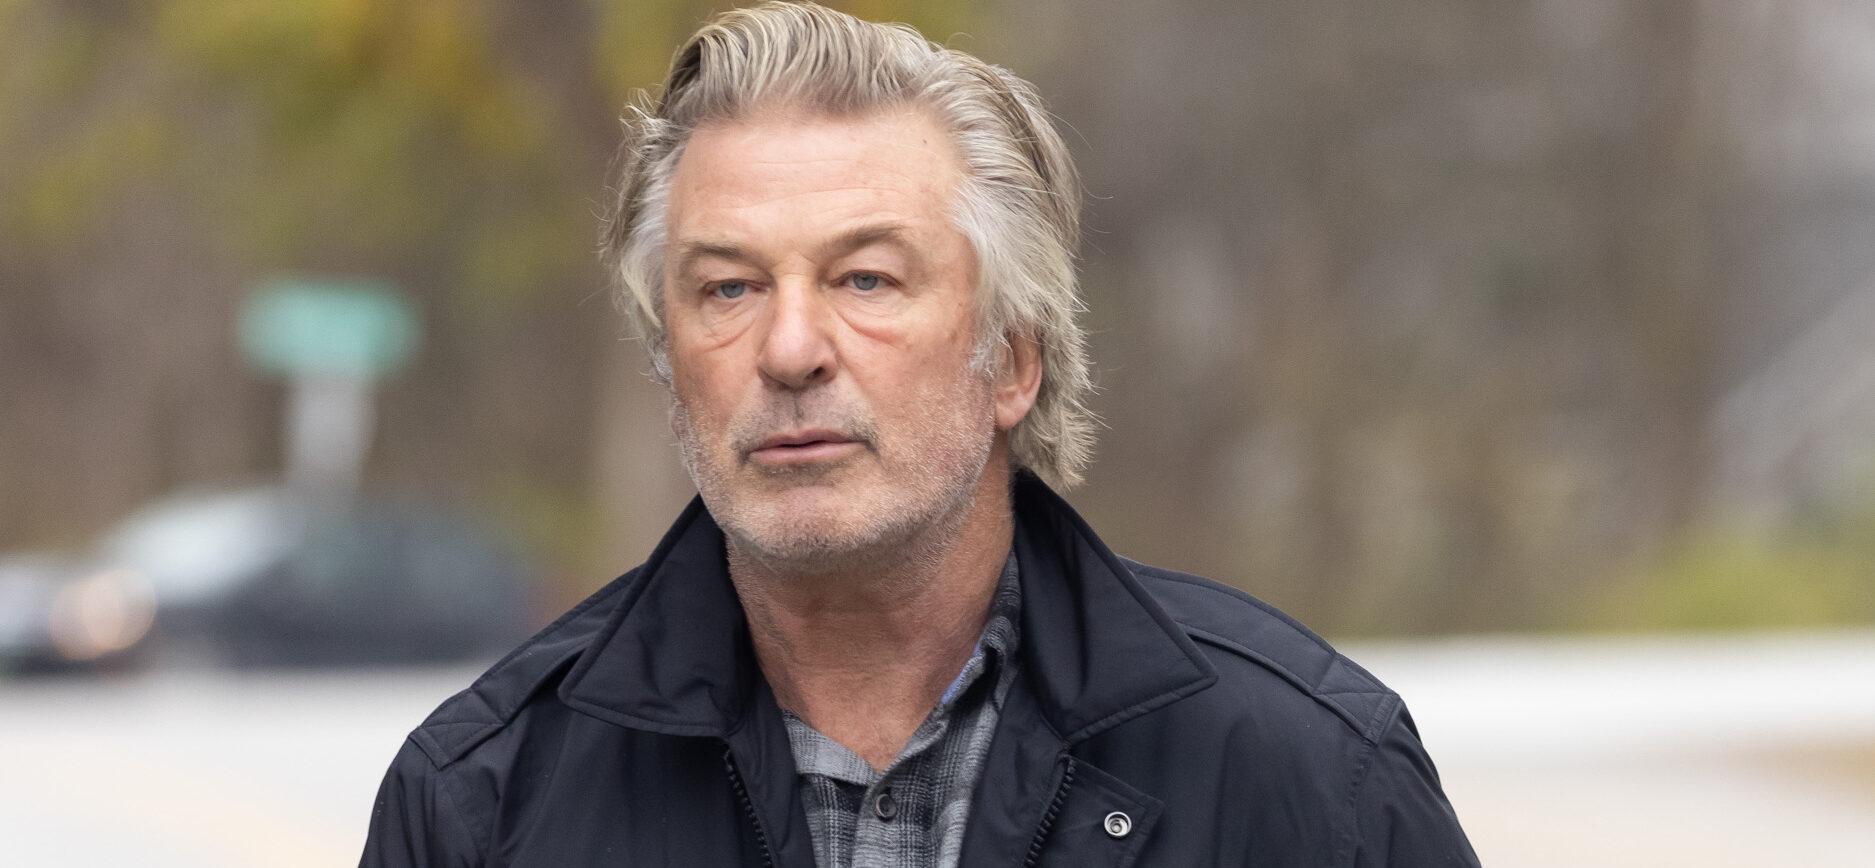 Alec Baldwin Steps Out To Play Poker Hours After ‘Rust’ Charges Filed